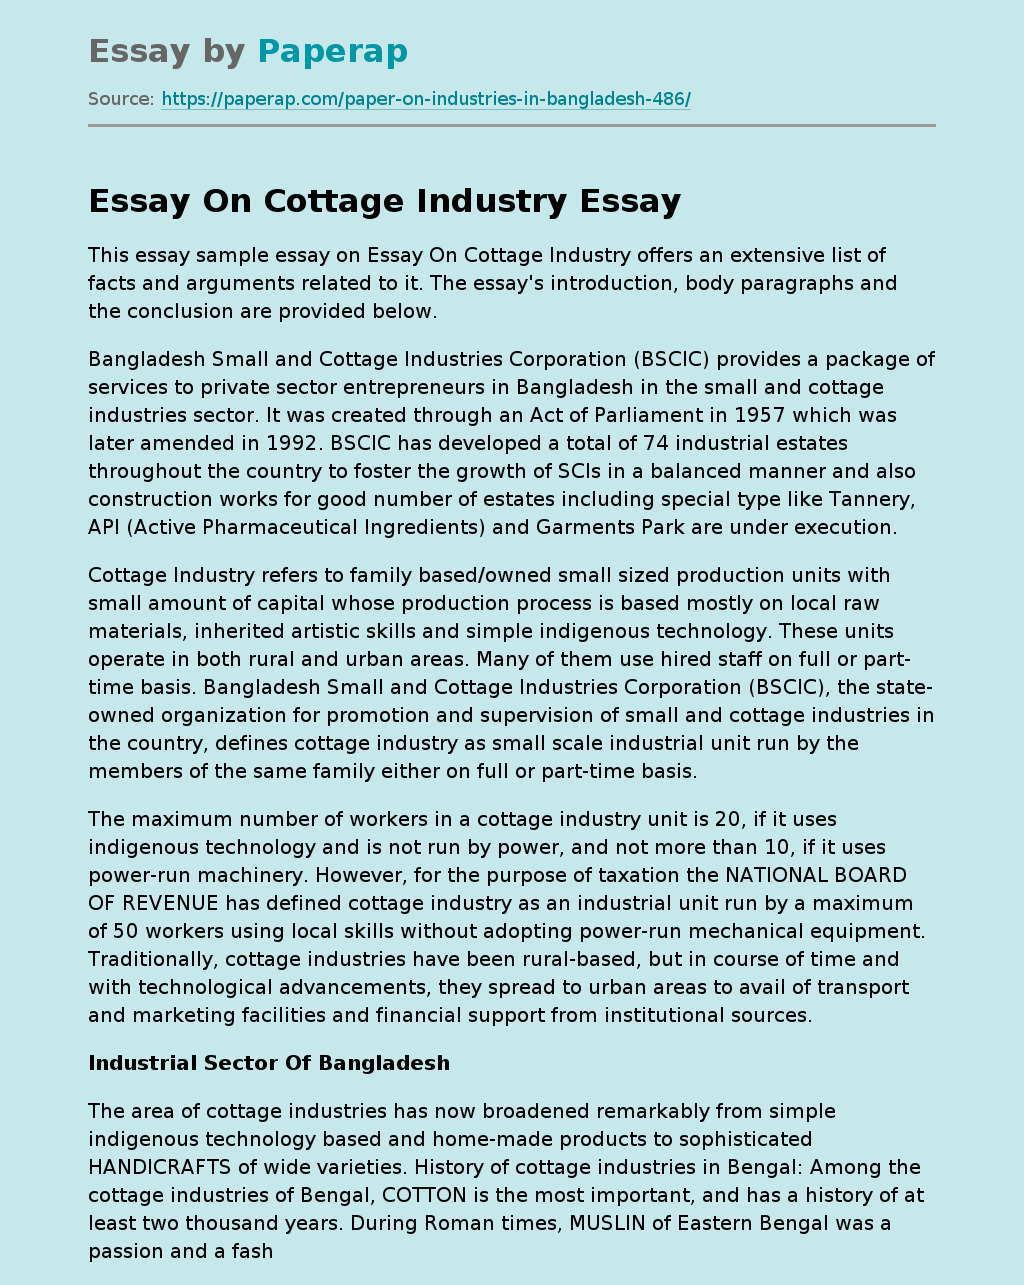 Essay On Cottage Industry